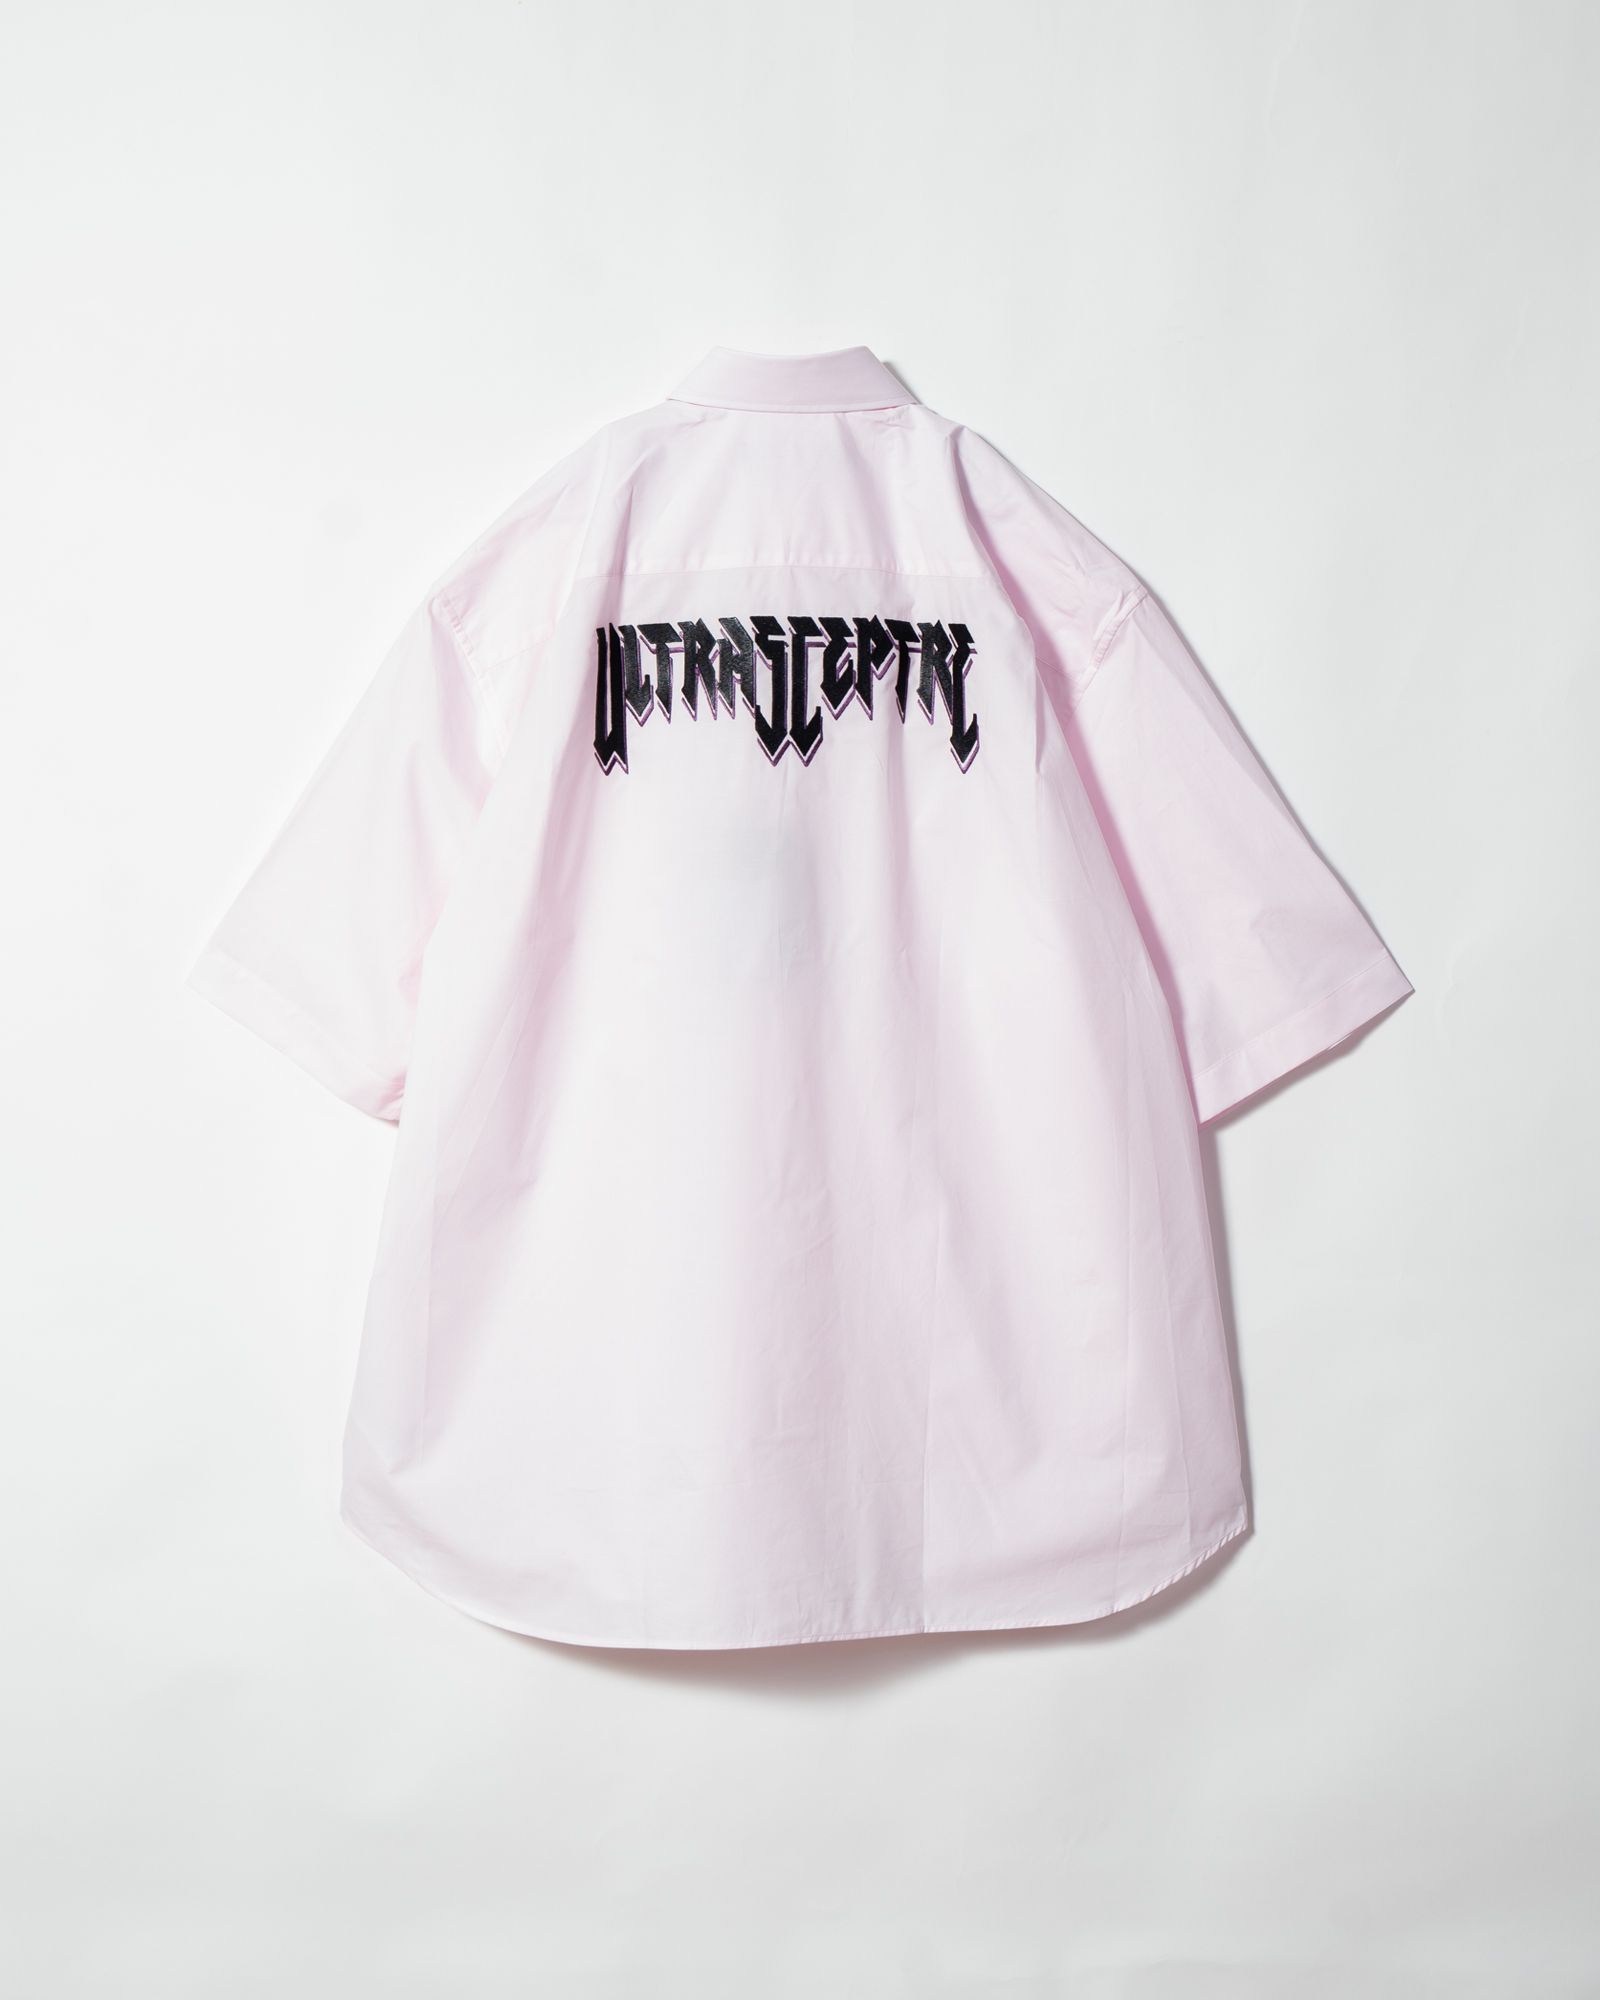 RAF SIMONS - Short sleeve shirt with Ultraceptre embroidery 